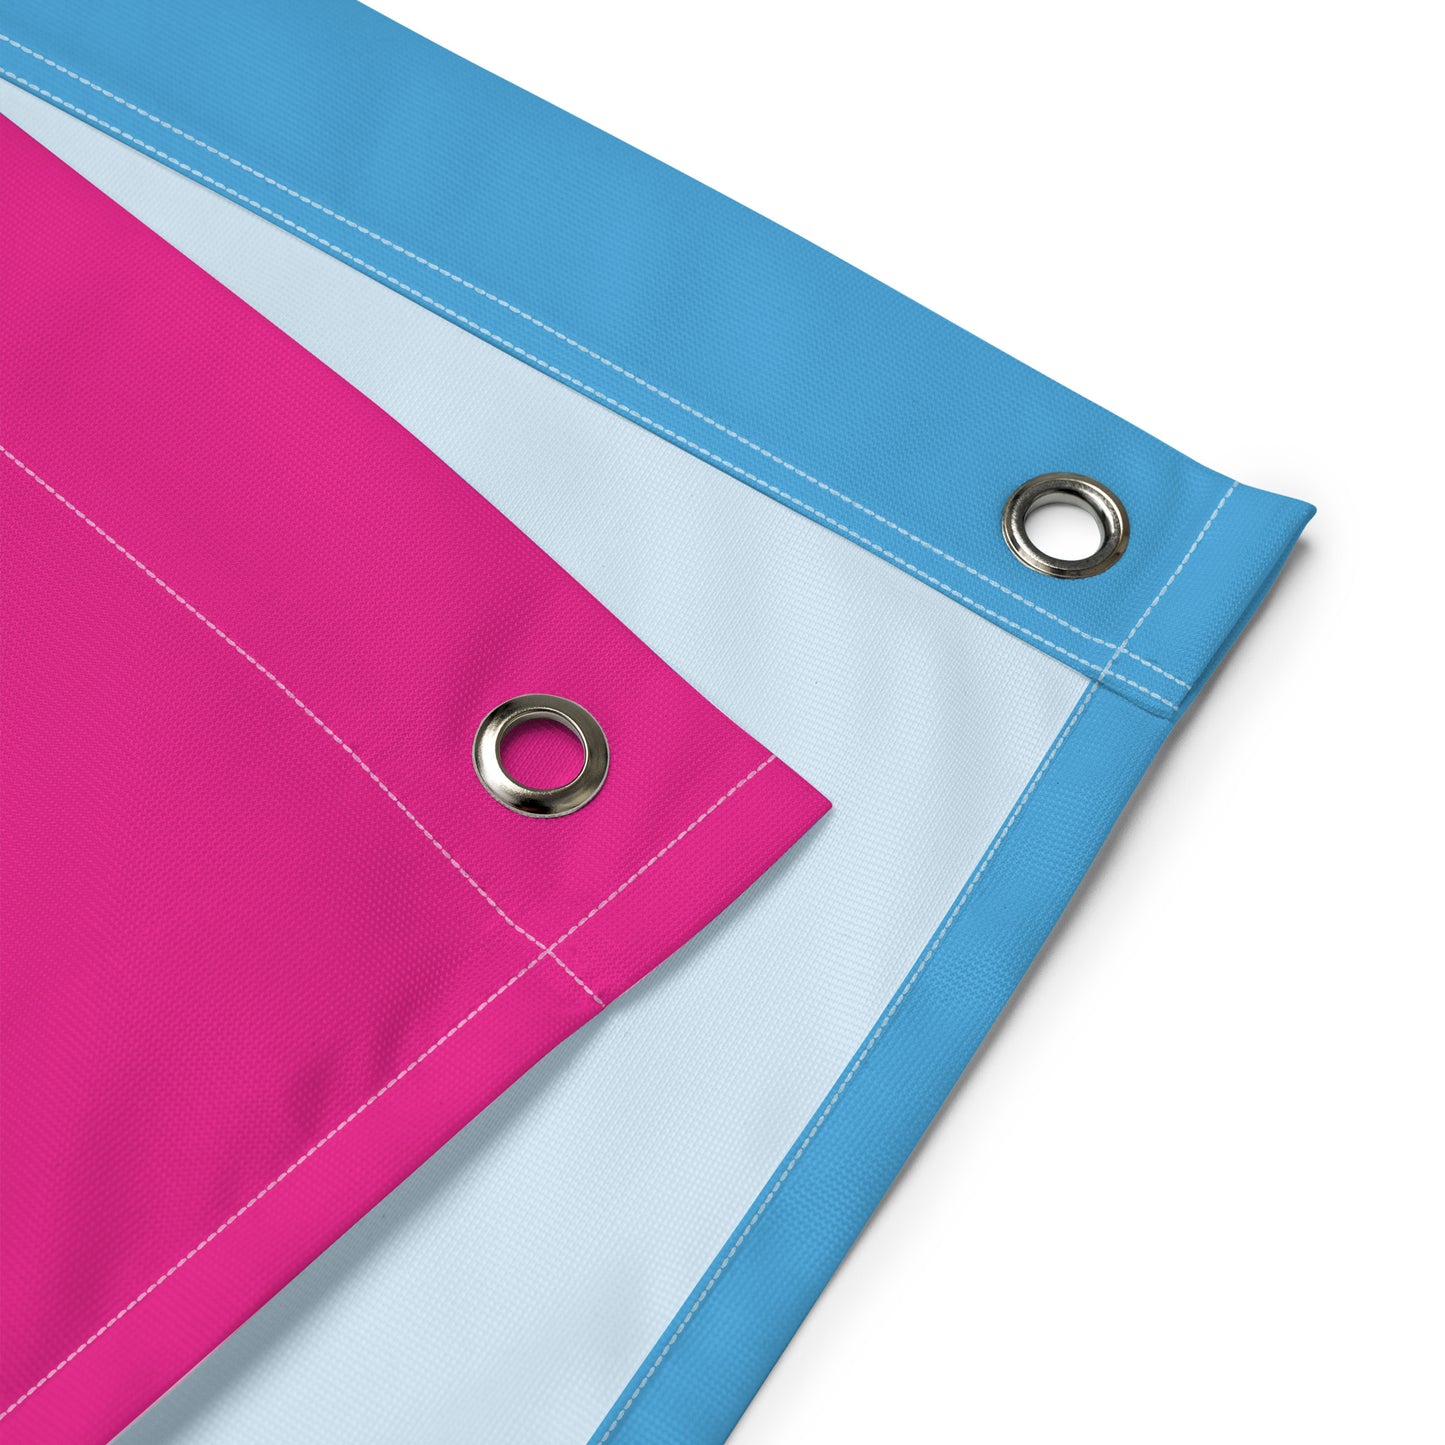 close-up of the grommets at the corners of the pansexual blackbeard pirate flag